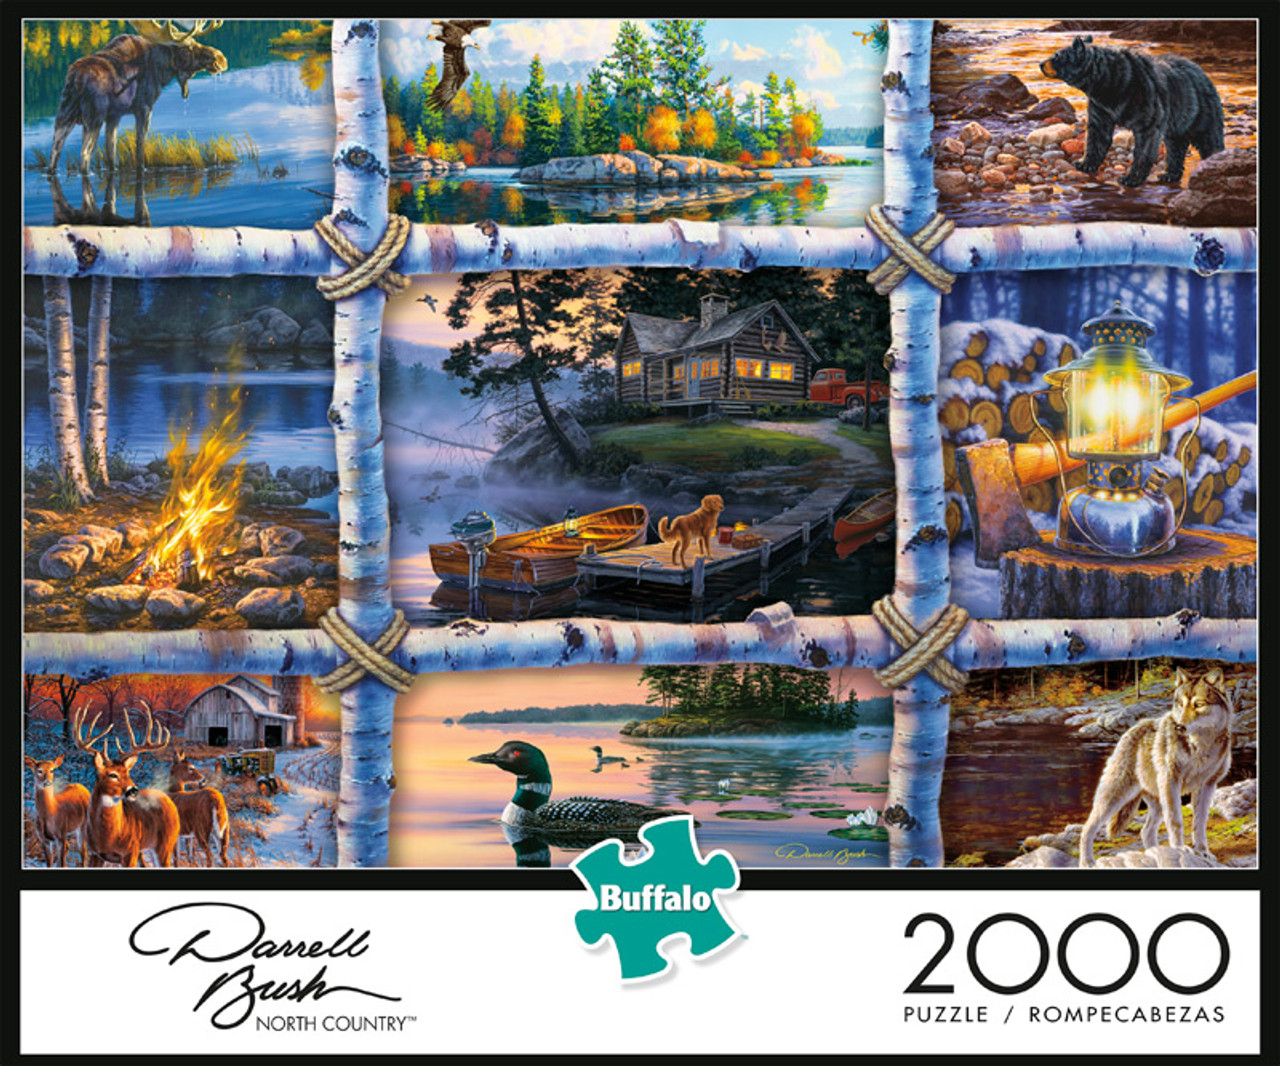 Darrell Bush North Country 2000 Piece Jigsaw Puzzle